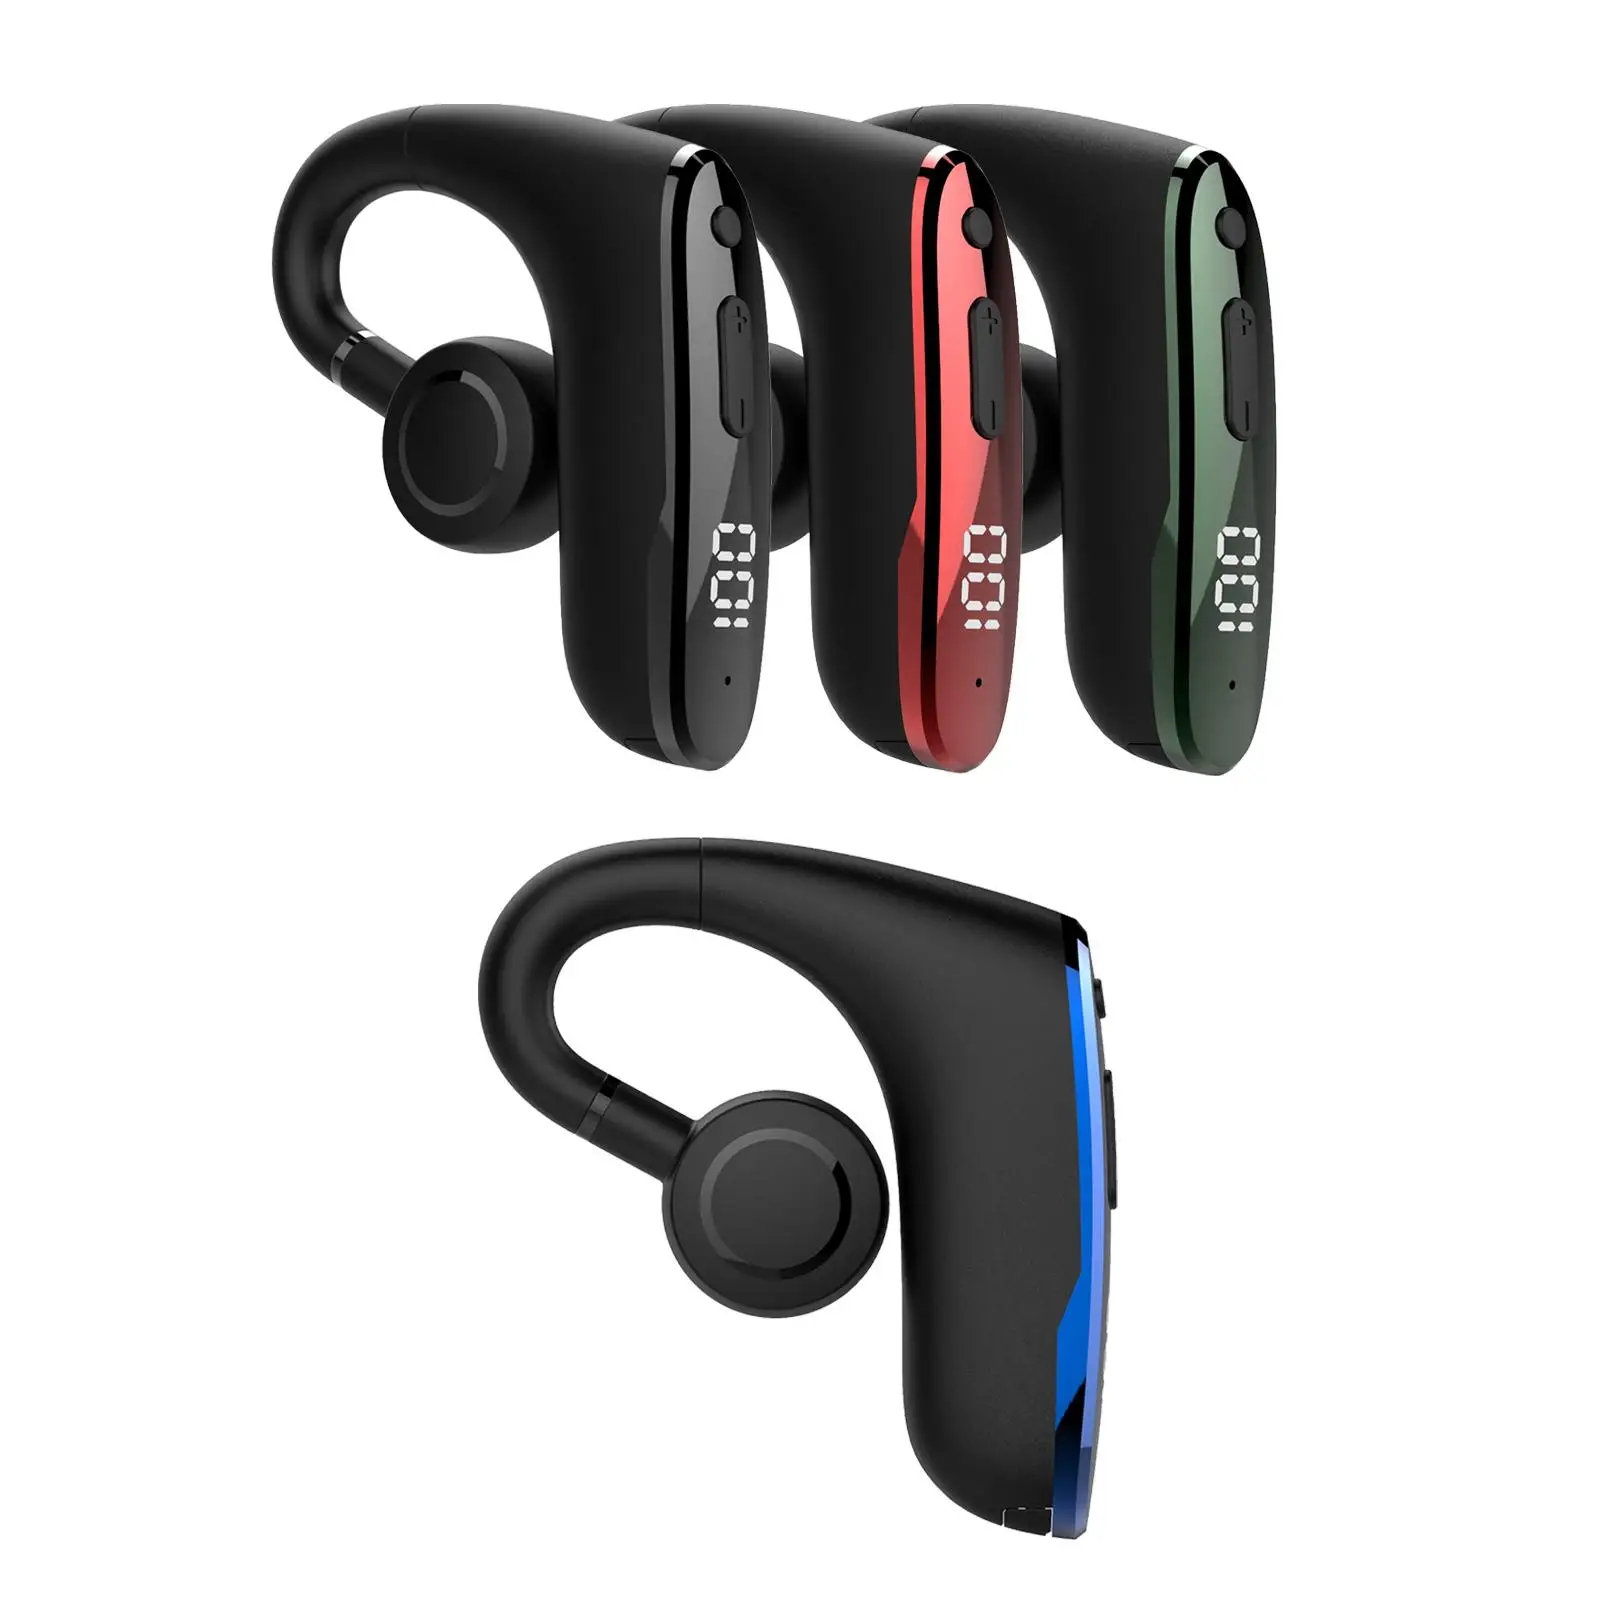 Bluetooth Headphones Handsfree 12 Hour Playtime Painless wearing Earhooks for Driving